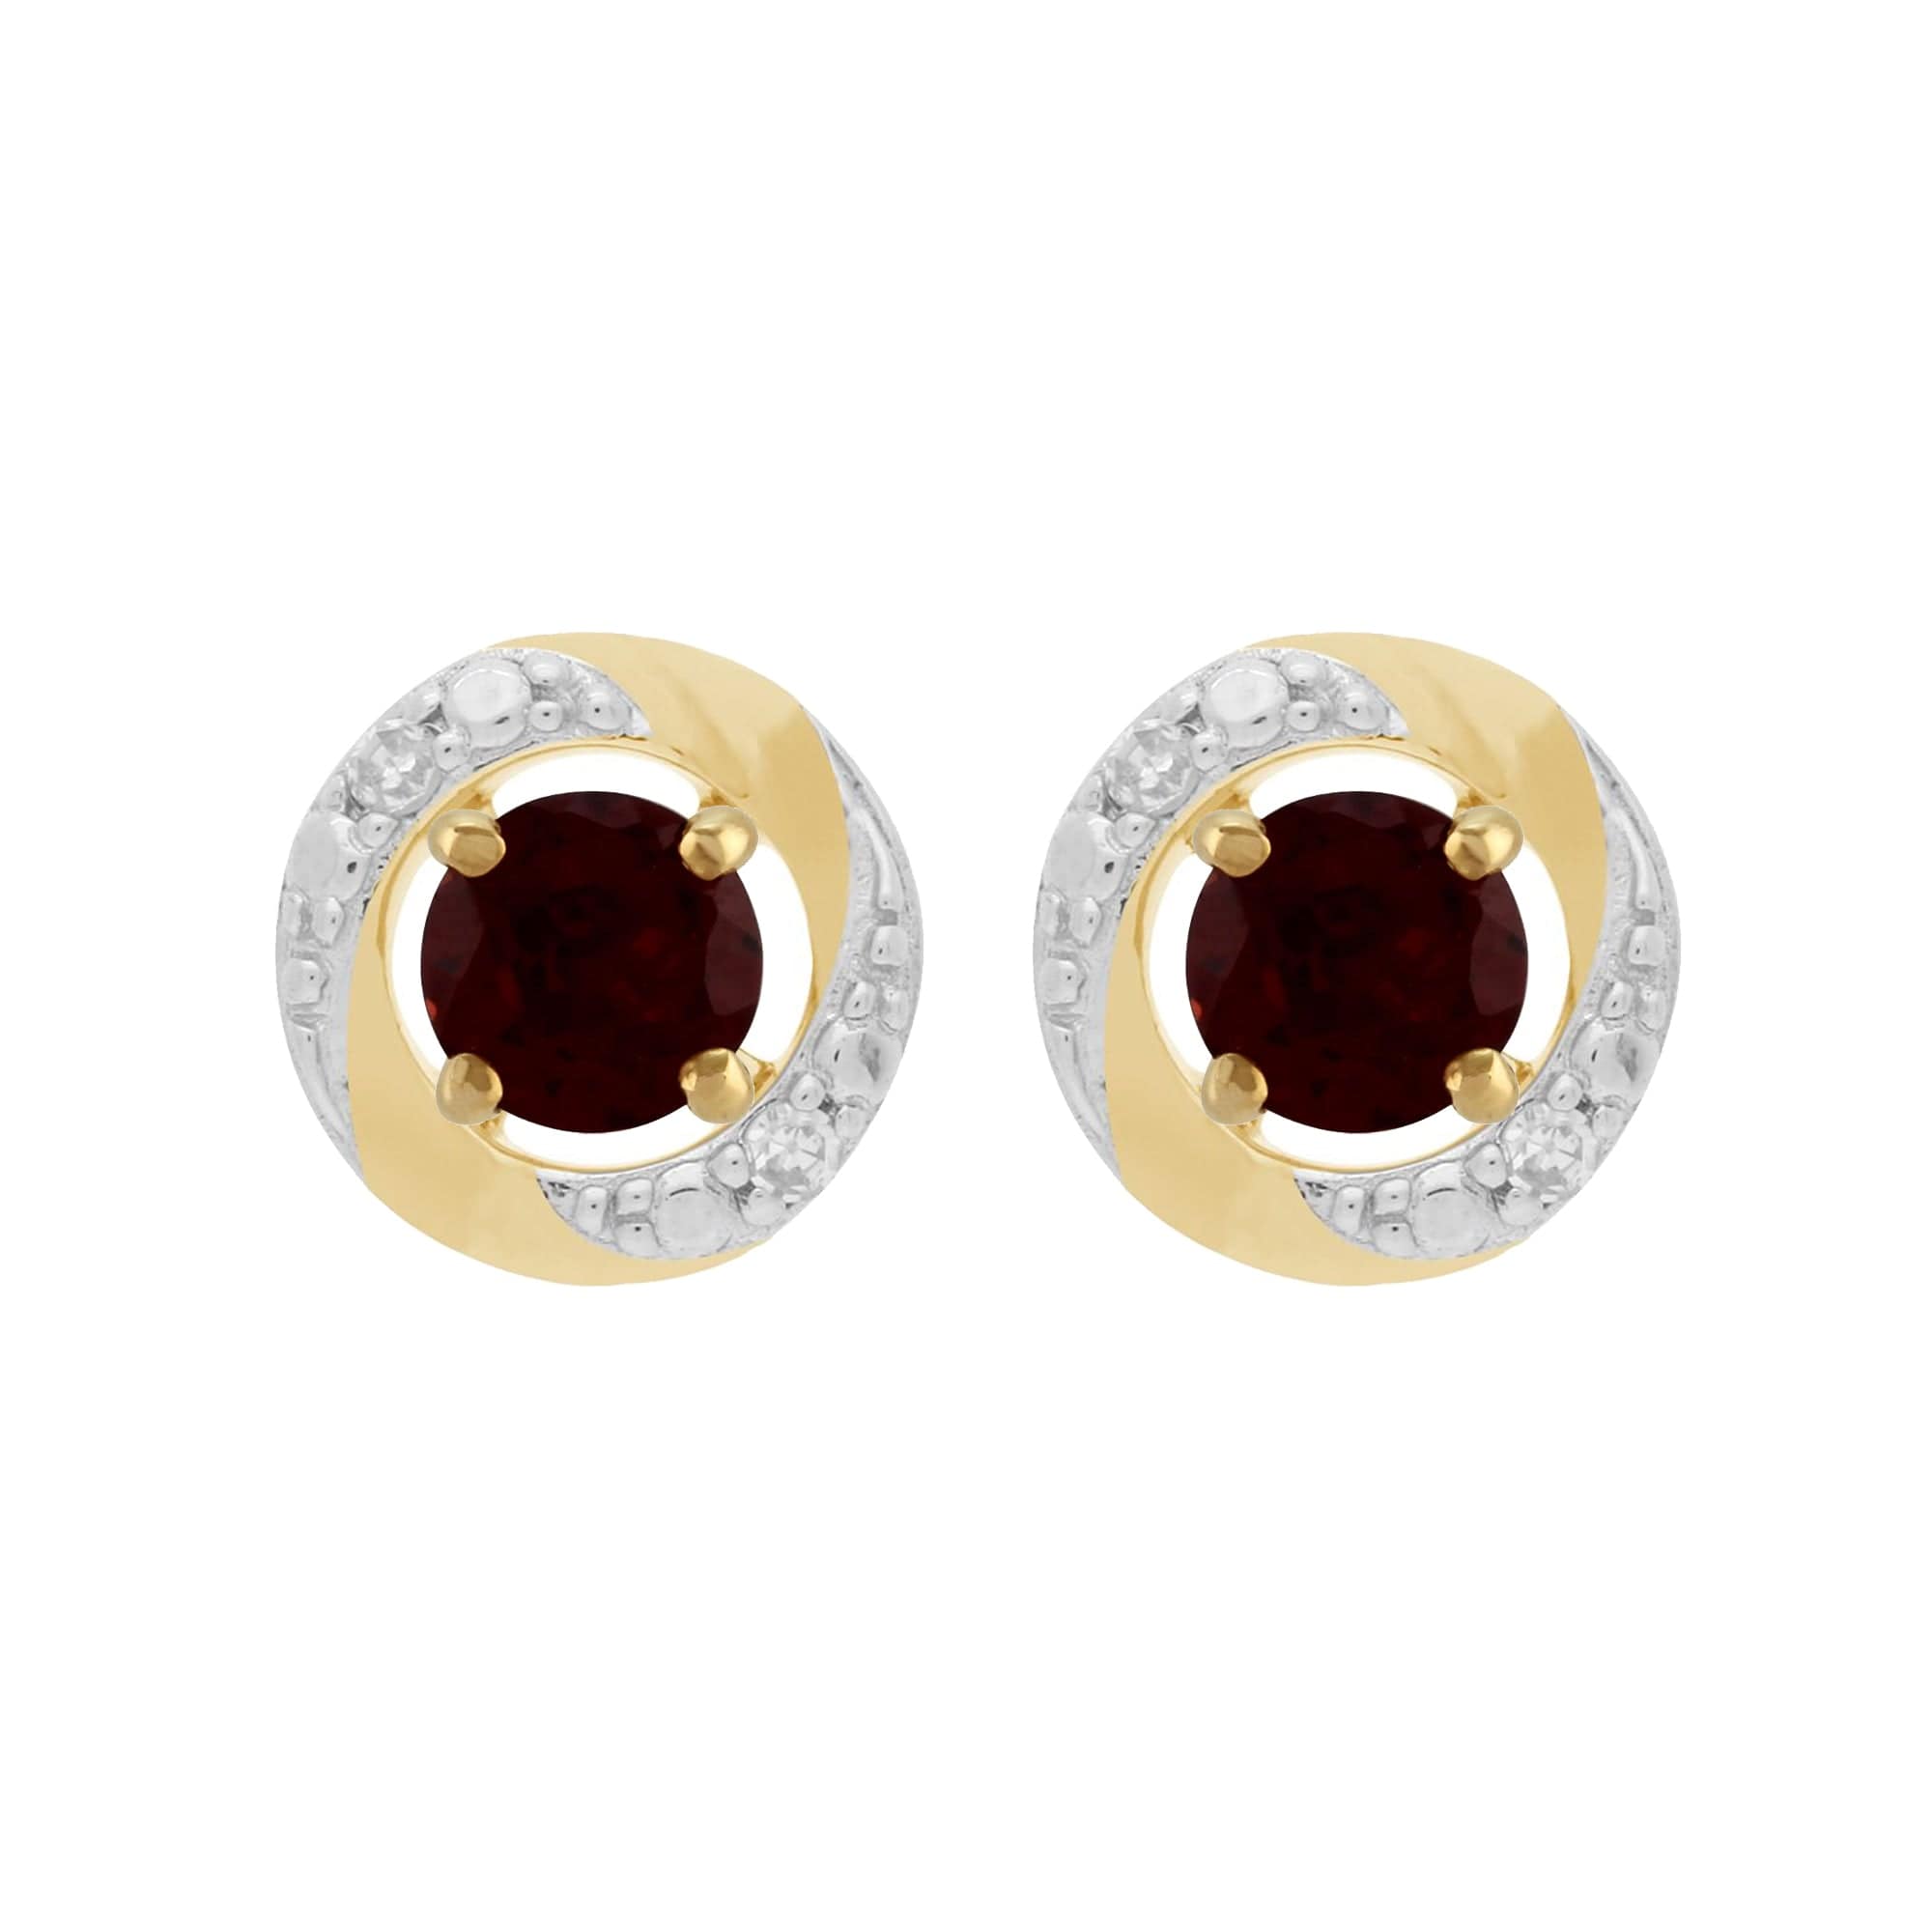 11568-191E0374019 Classic Round Garnet Stud Earrings with Detachable Diamond Halo Ear Jacket in 9ct Yellow Gold 1